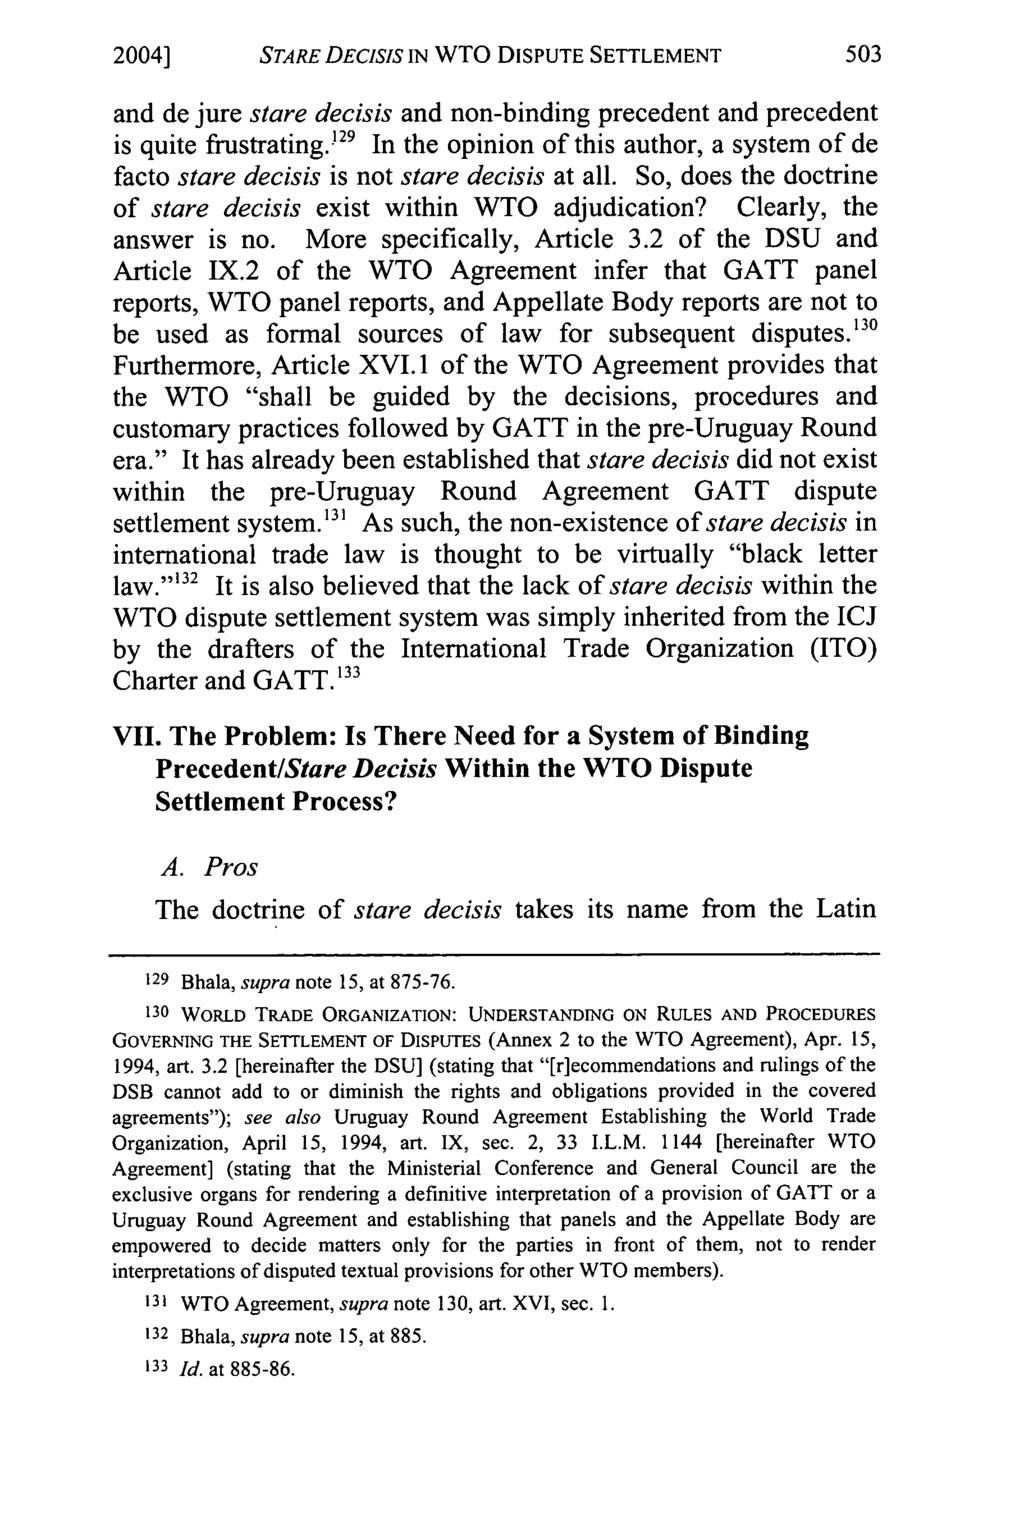 2004] STARE DECISIS IN WTO DISPUTE SETTLEMENT and de jure stare decisis and non-binding precedent and precedent is quite frustrating.